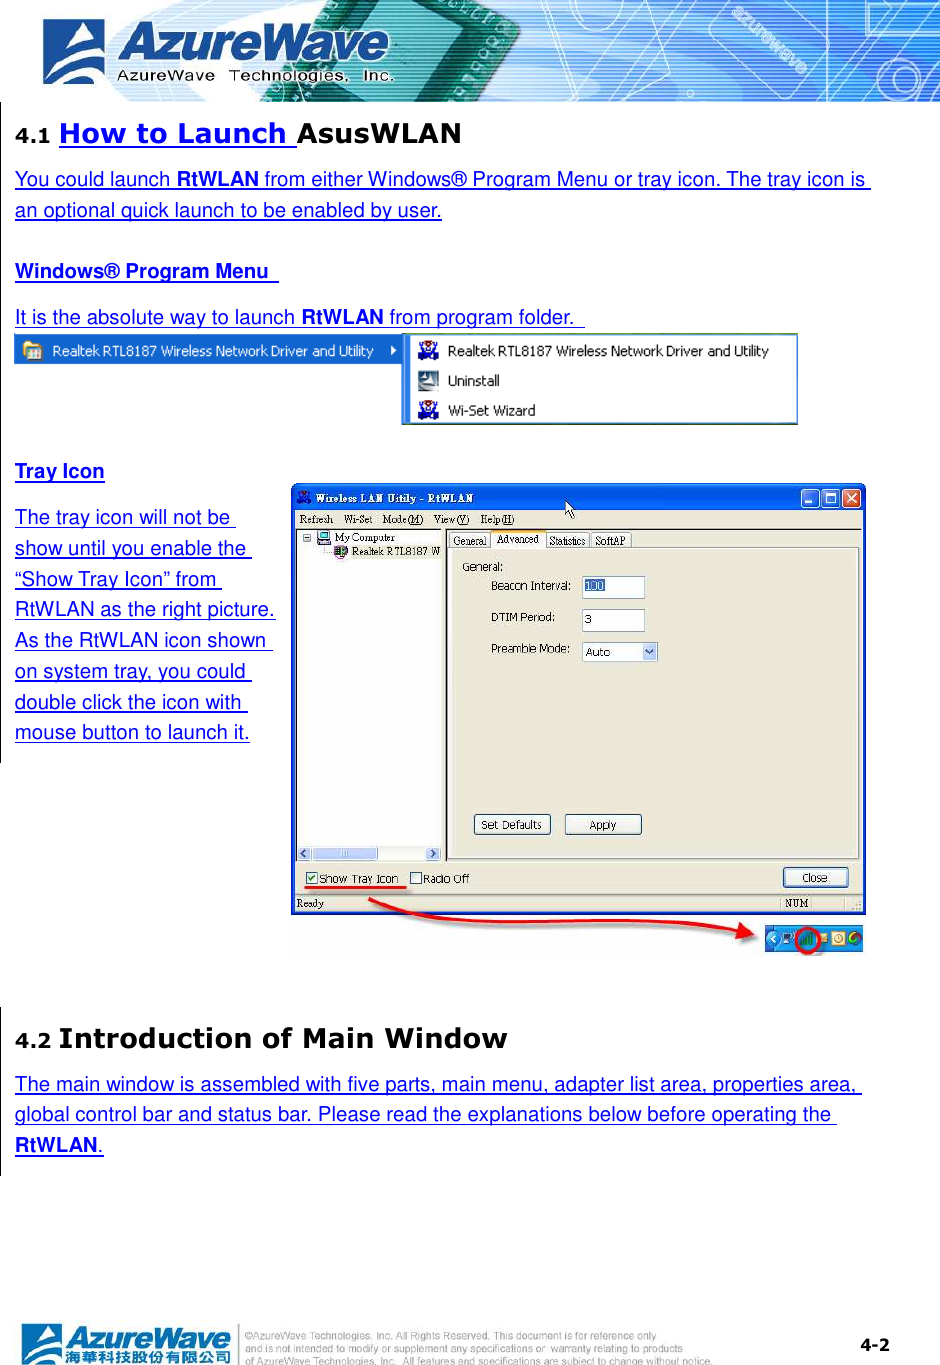  4-2 4.1 How to Launch AsusWLAN You could launch RtWLAN from either Windows® Program Menu or tray icon. The tray icon is an optional quick launch to be enabled by user. Windows® Program Menu   It is the absolute way to launch RtWLAN from program folder.  Tray Icon The tray icon will not be show until you enable the “Show Tray Icon” from RtWLAN as the right picture. As the RtWLAN icon shown on system tray, you could double click the icon with mouse button to launch it.  4.2 Introduction of Main Window The main window is assembled with five parts, main menu, adapter list area, properties area, global control bar and status bar. Please read the explanations below before operating the RtWLAN. 